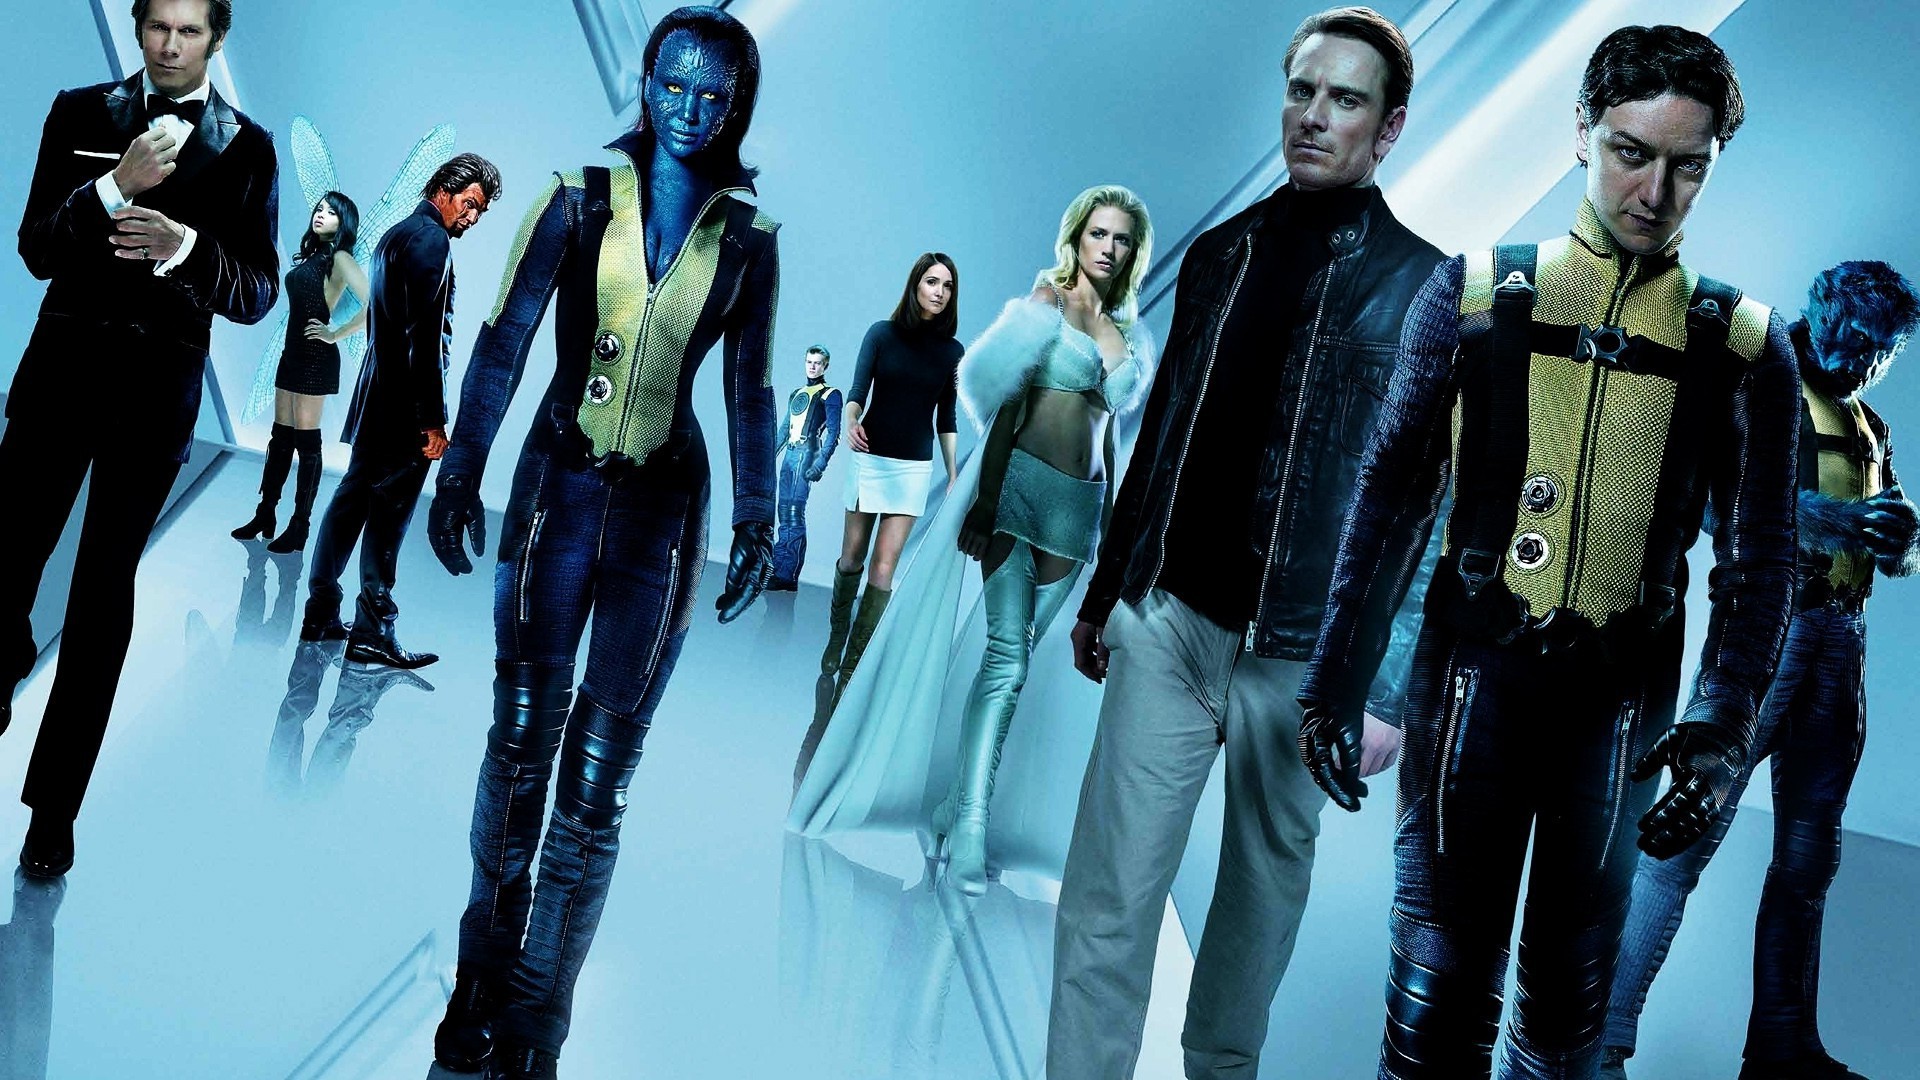 1920x1080 movies, X Men: First Class, Magneto, Charles Xavier, Mystique, James  McAvoy, Michael Fassbender, Beast (character), Jennifer Lawrence, Emma  Frost Wallpapers ...